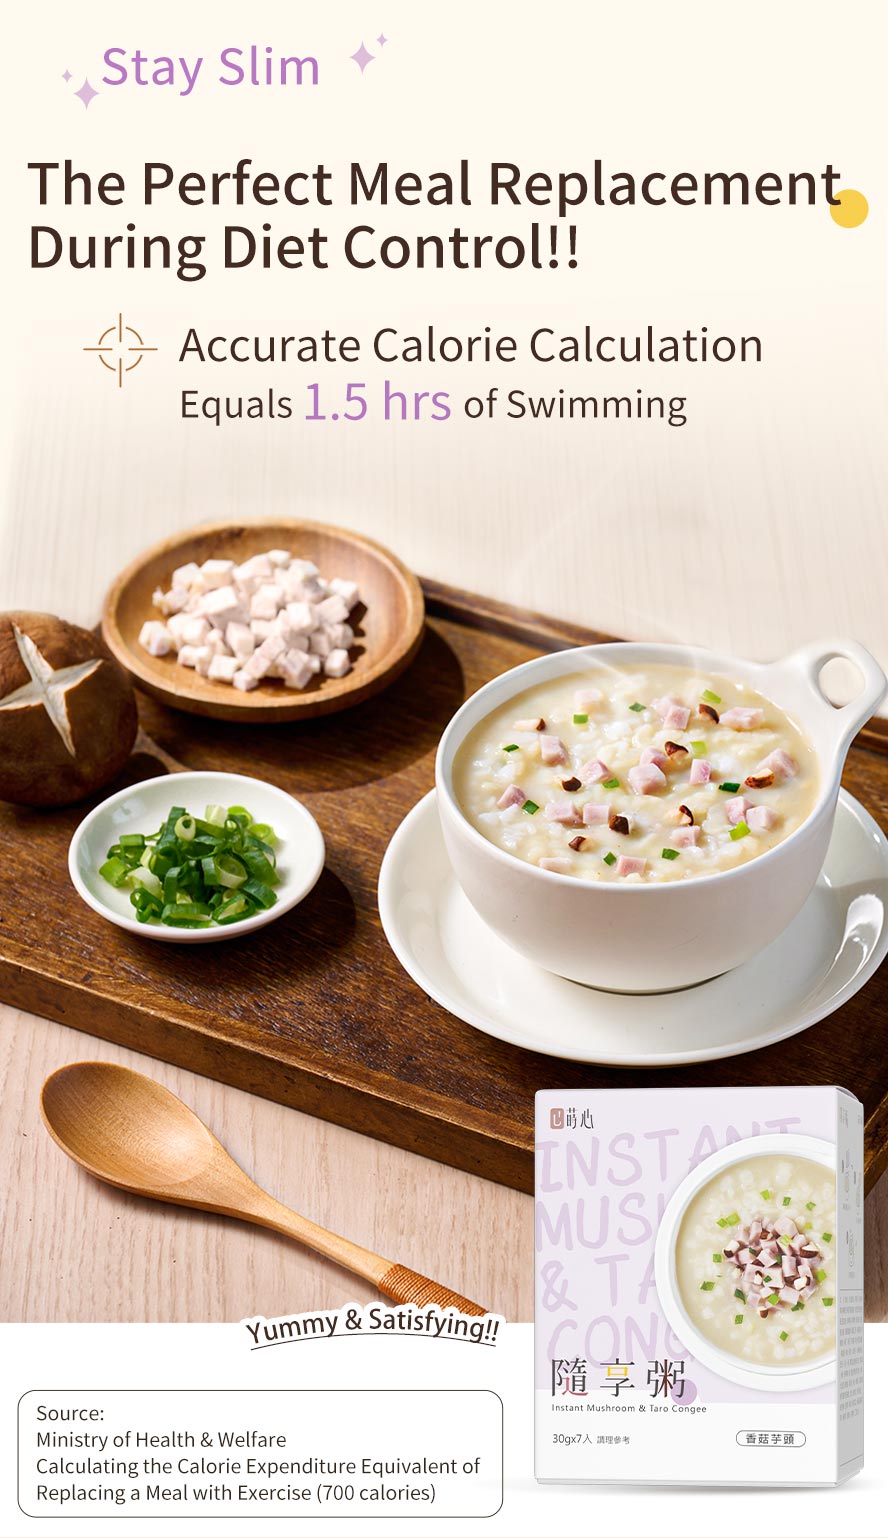 SiimHeart Instant Mushroom & Taro Congee is a prefect meal replacement during diet control